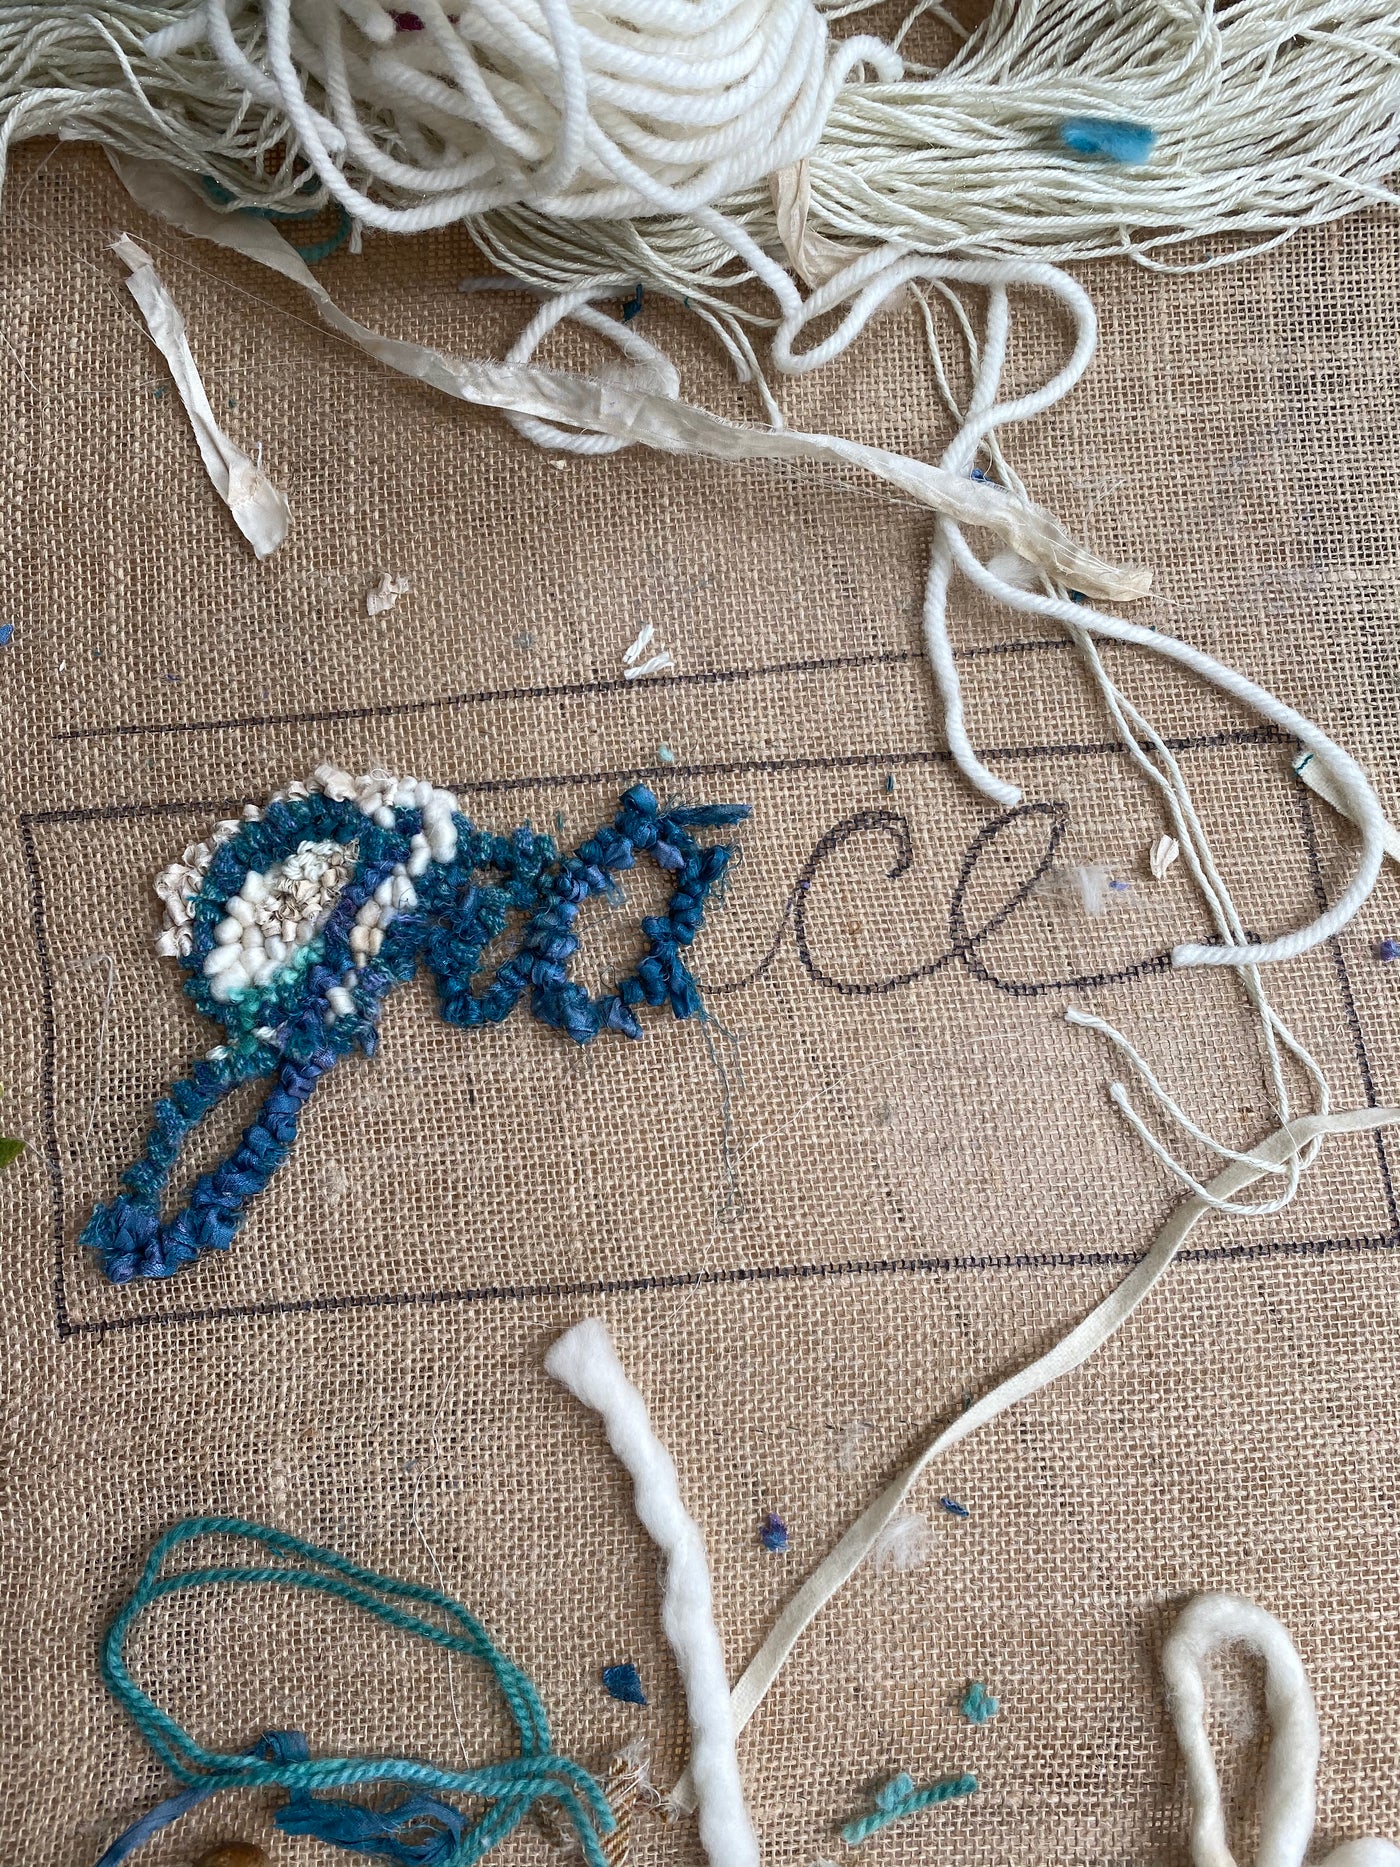 How to do Lettering in Hooked Rugs